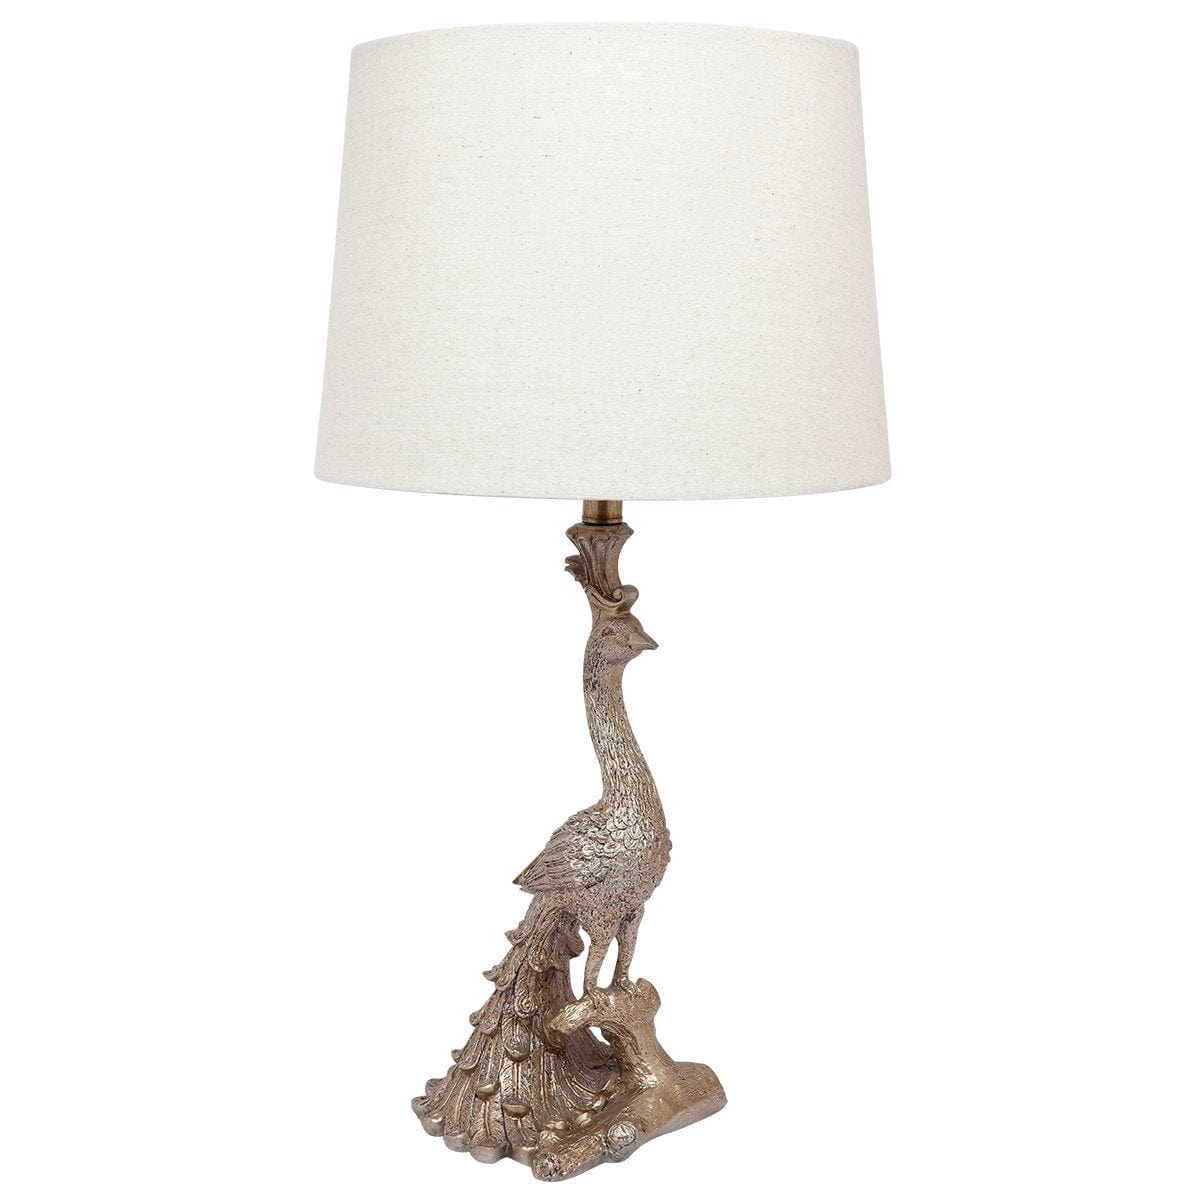 CAFE LIGHTING & LIVING Table Lamp Peacock Table Lamp - Champagne Gold 11627